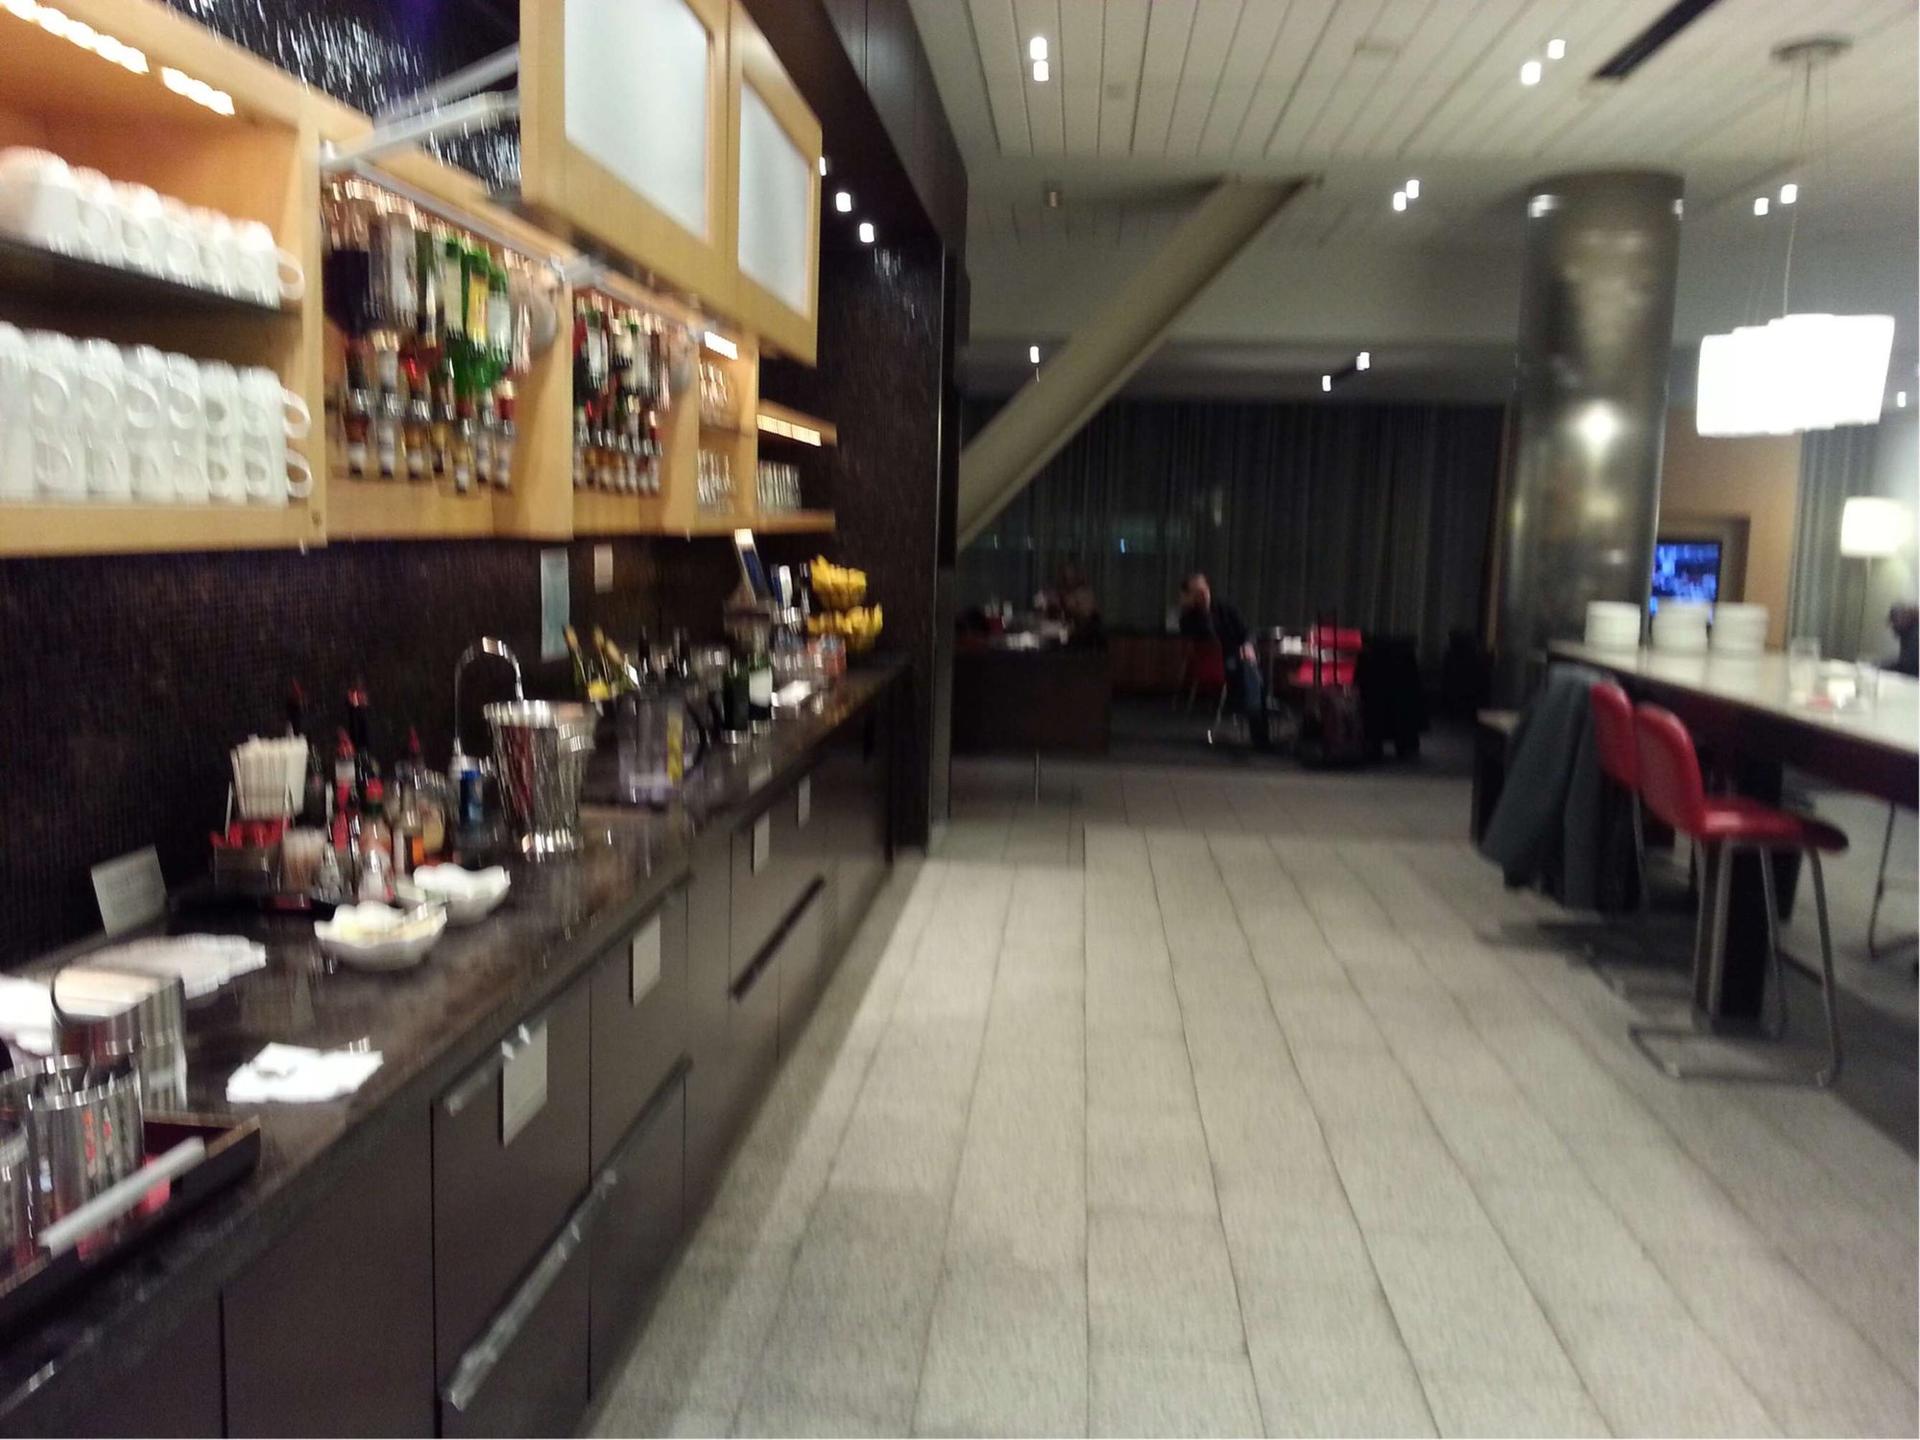 Air Canada Maple Leaf Lounge image 16 of 21